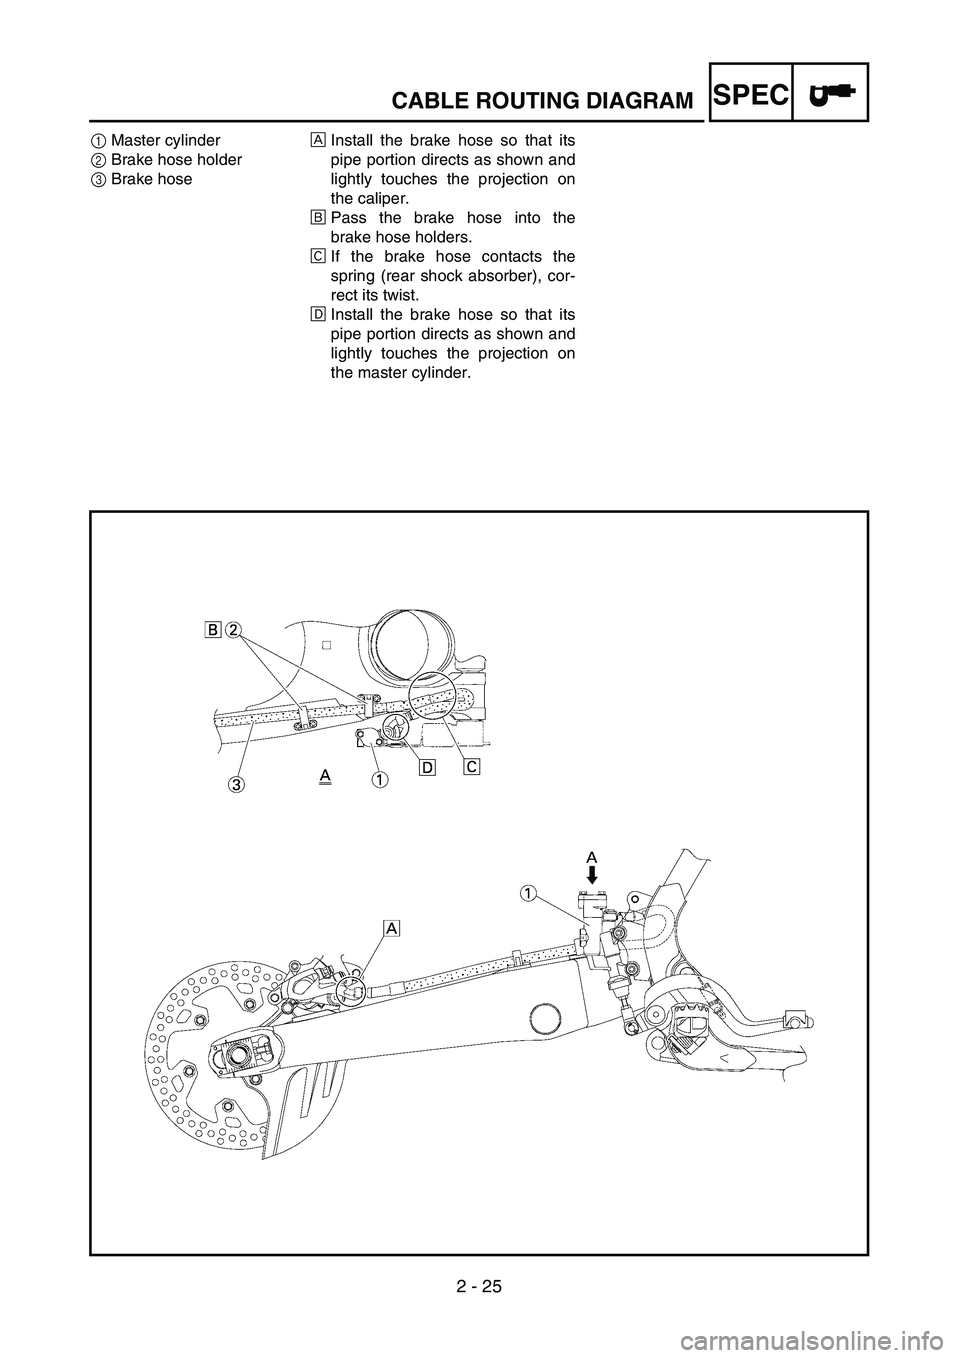 YAMAHA YZ450F 2004  Owners Manual 2 - 25
SPECCABLE ROUTING DIAGRAM
1Master cylinder
2Brake hose holder 
3Brake hoseÅInstall the brake hose so that its
pipe portion directs as shown and
lightly touches the projection on
the caliper.
�